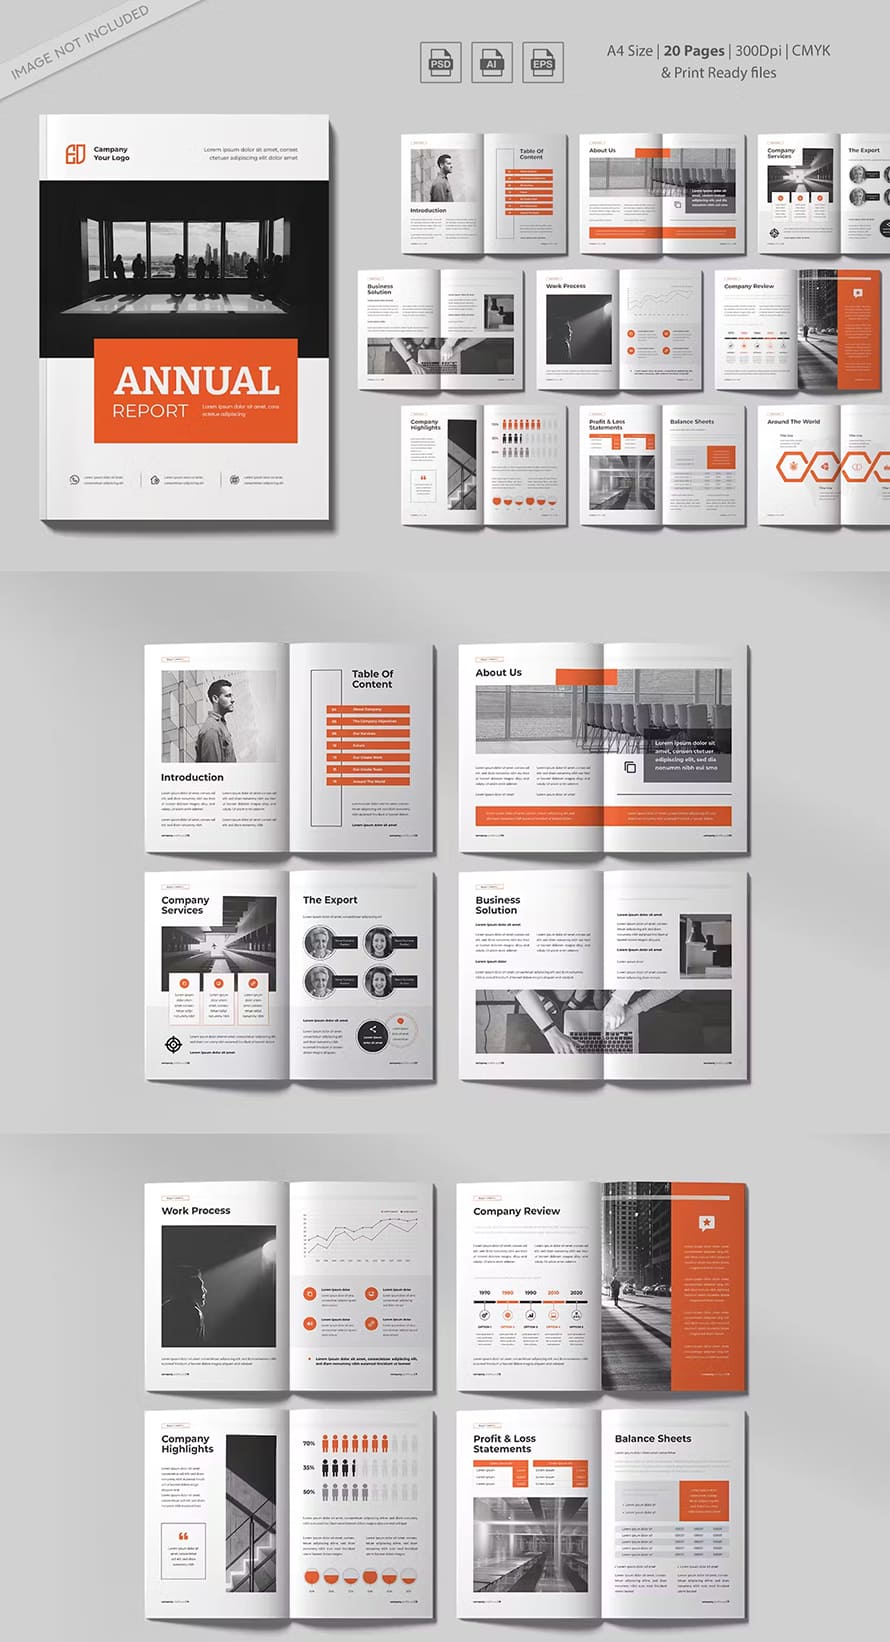 Corporate Annual Report Template (20 Pages)